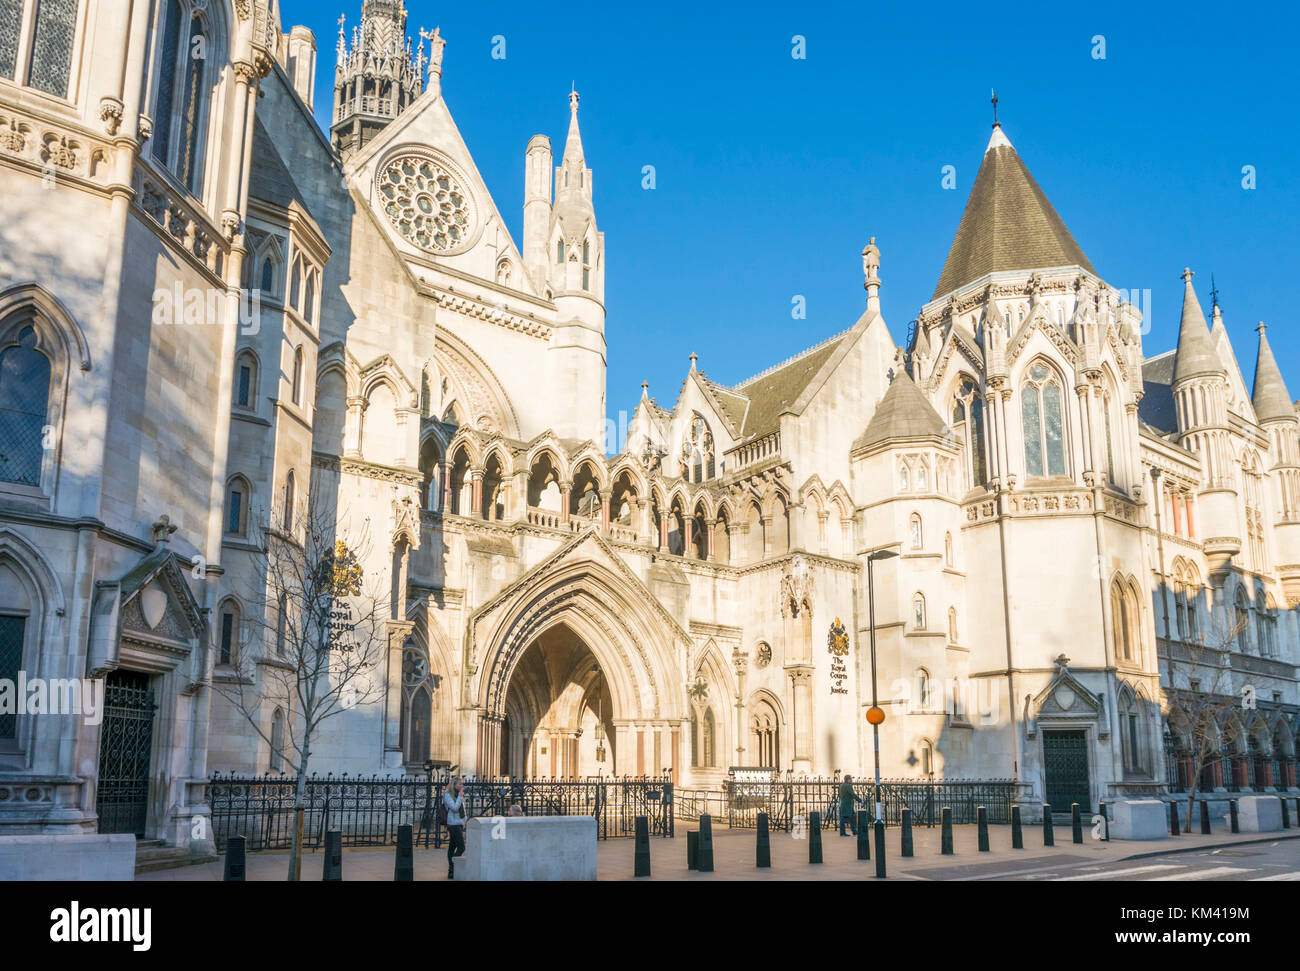 Die Royal Courts of Justice in London Royal Courts of Justice außen England uk Go Europe Stockfoto